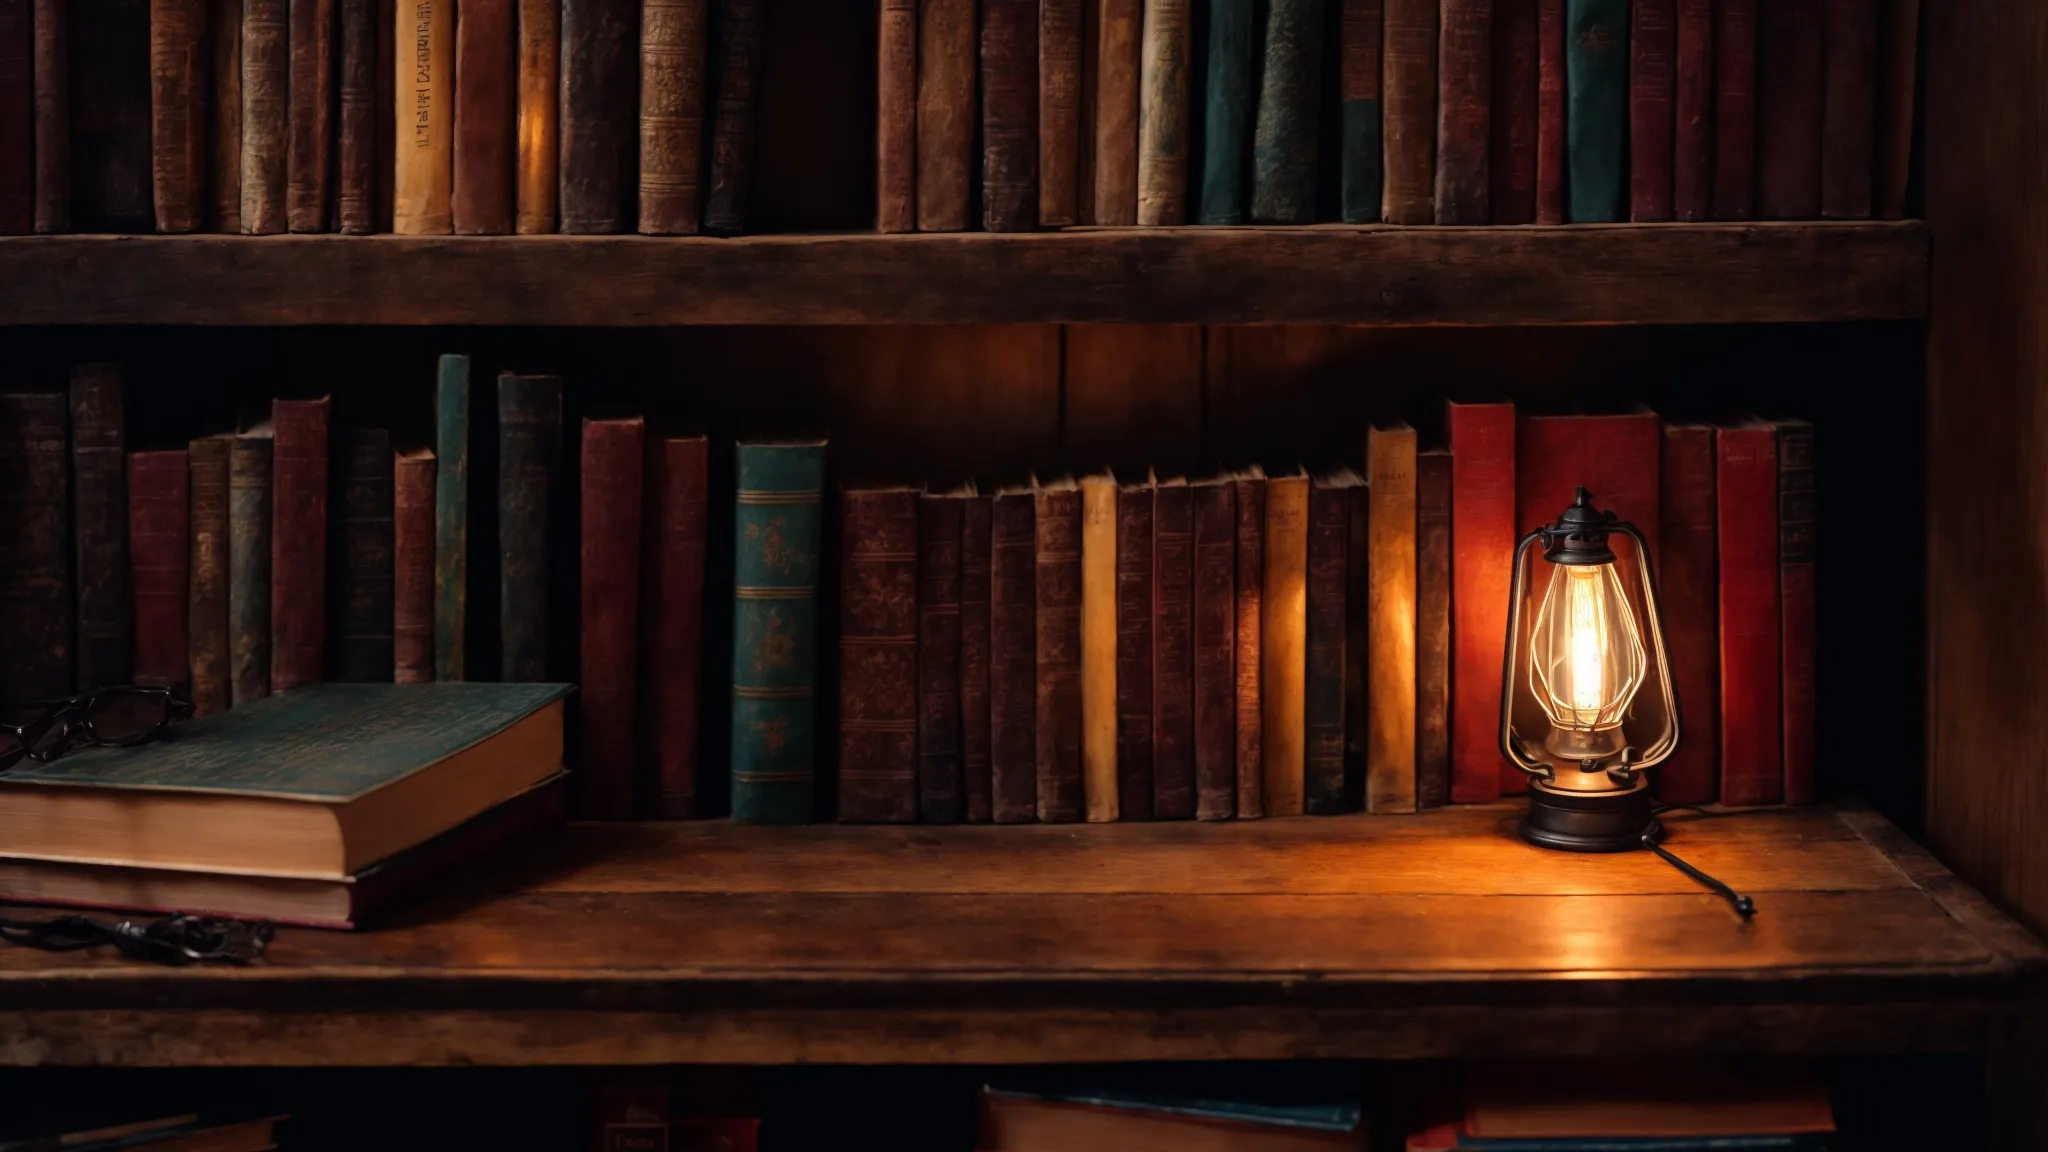 a rustic bookshelf brimming with colorful, old books bathed in the soft glow of a vintage lamp, offering a sense of nostalgia and a journey through stories.